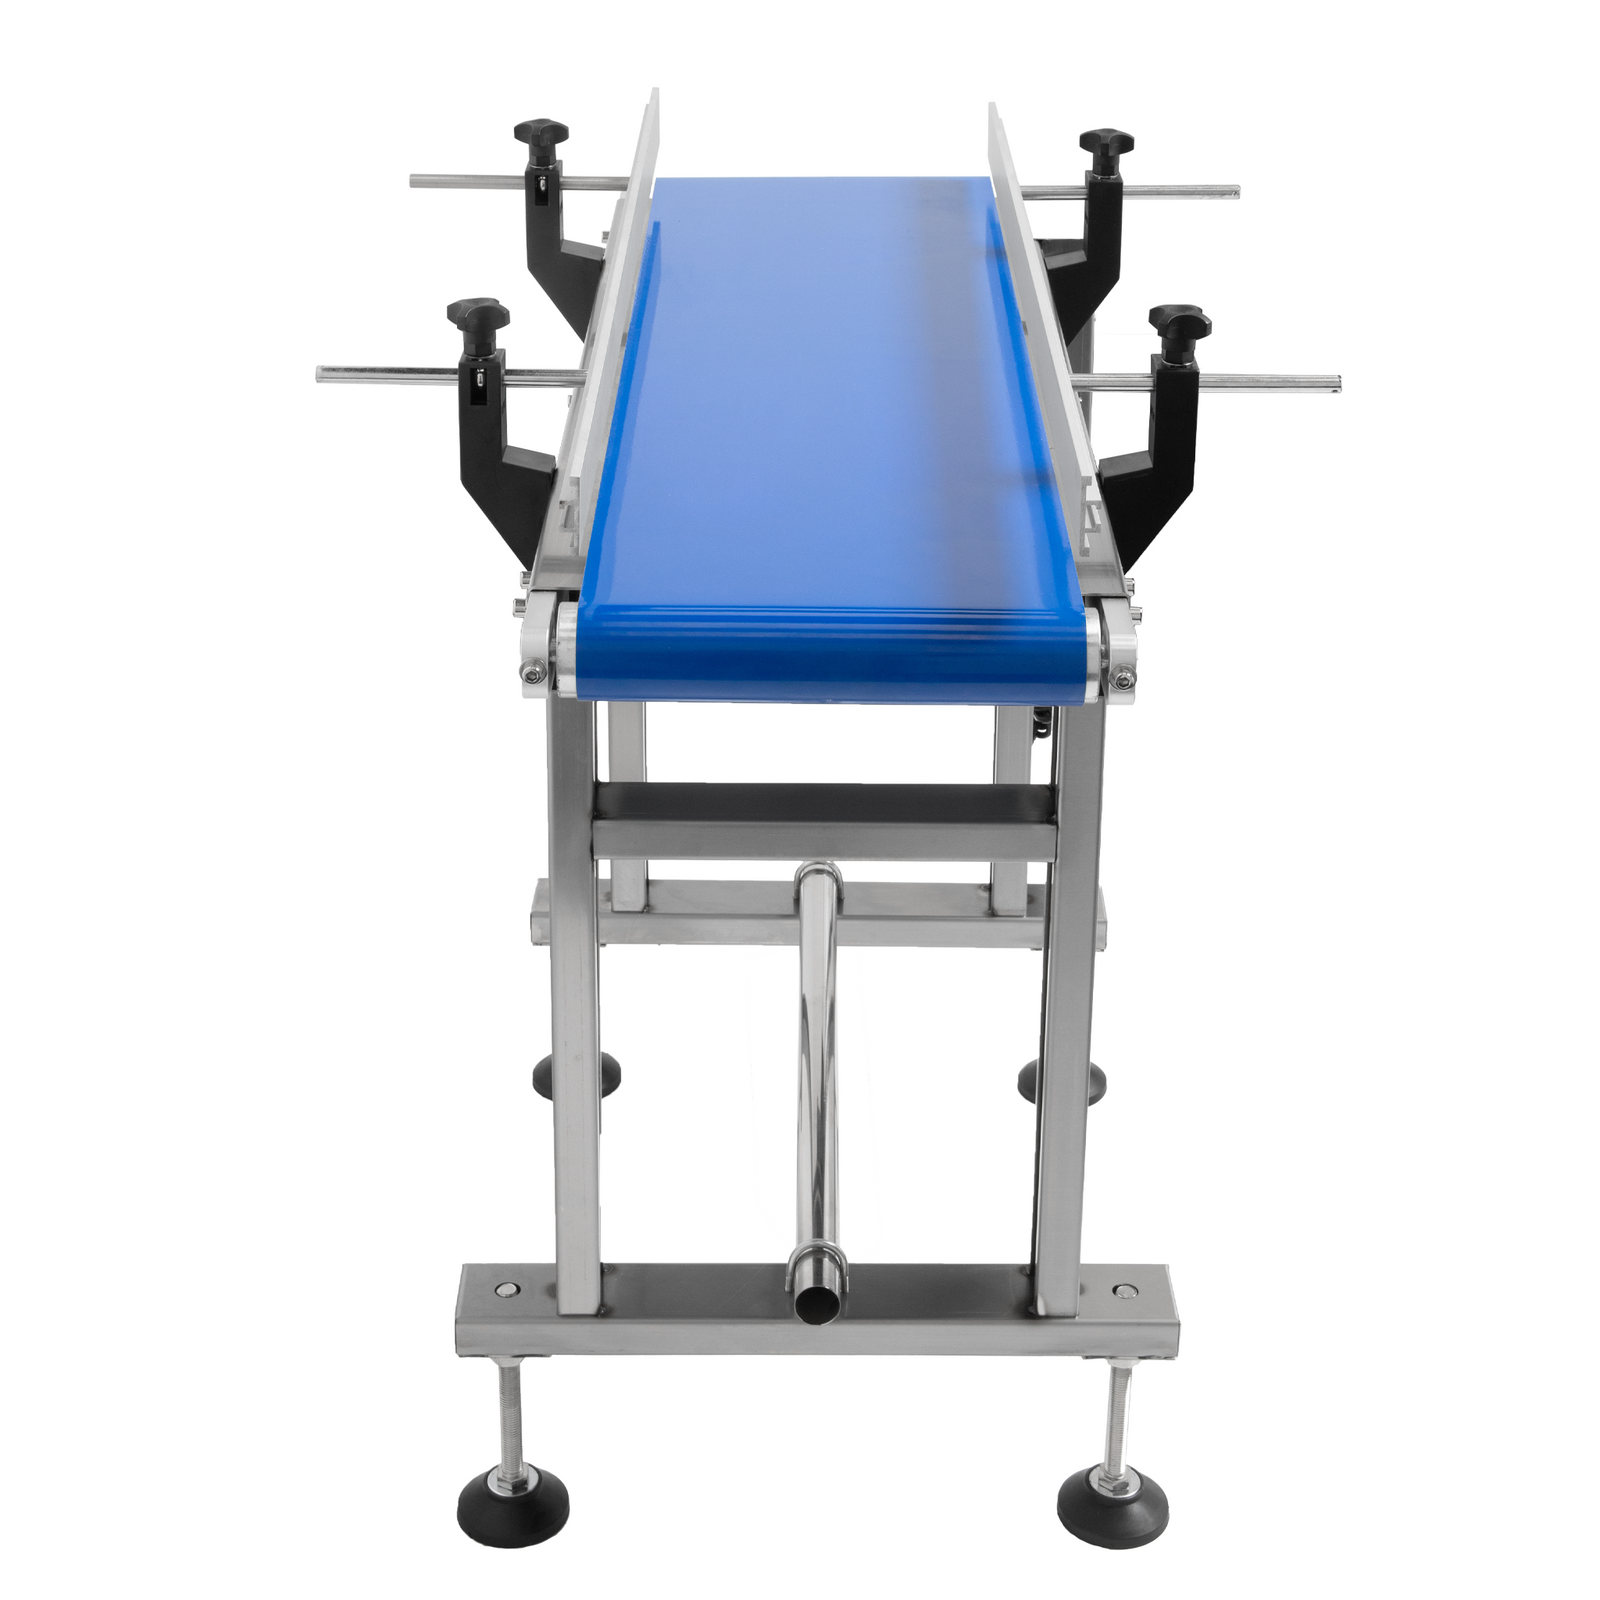 motorized conveyor with steel frame and blue belt that features side guard rails